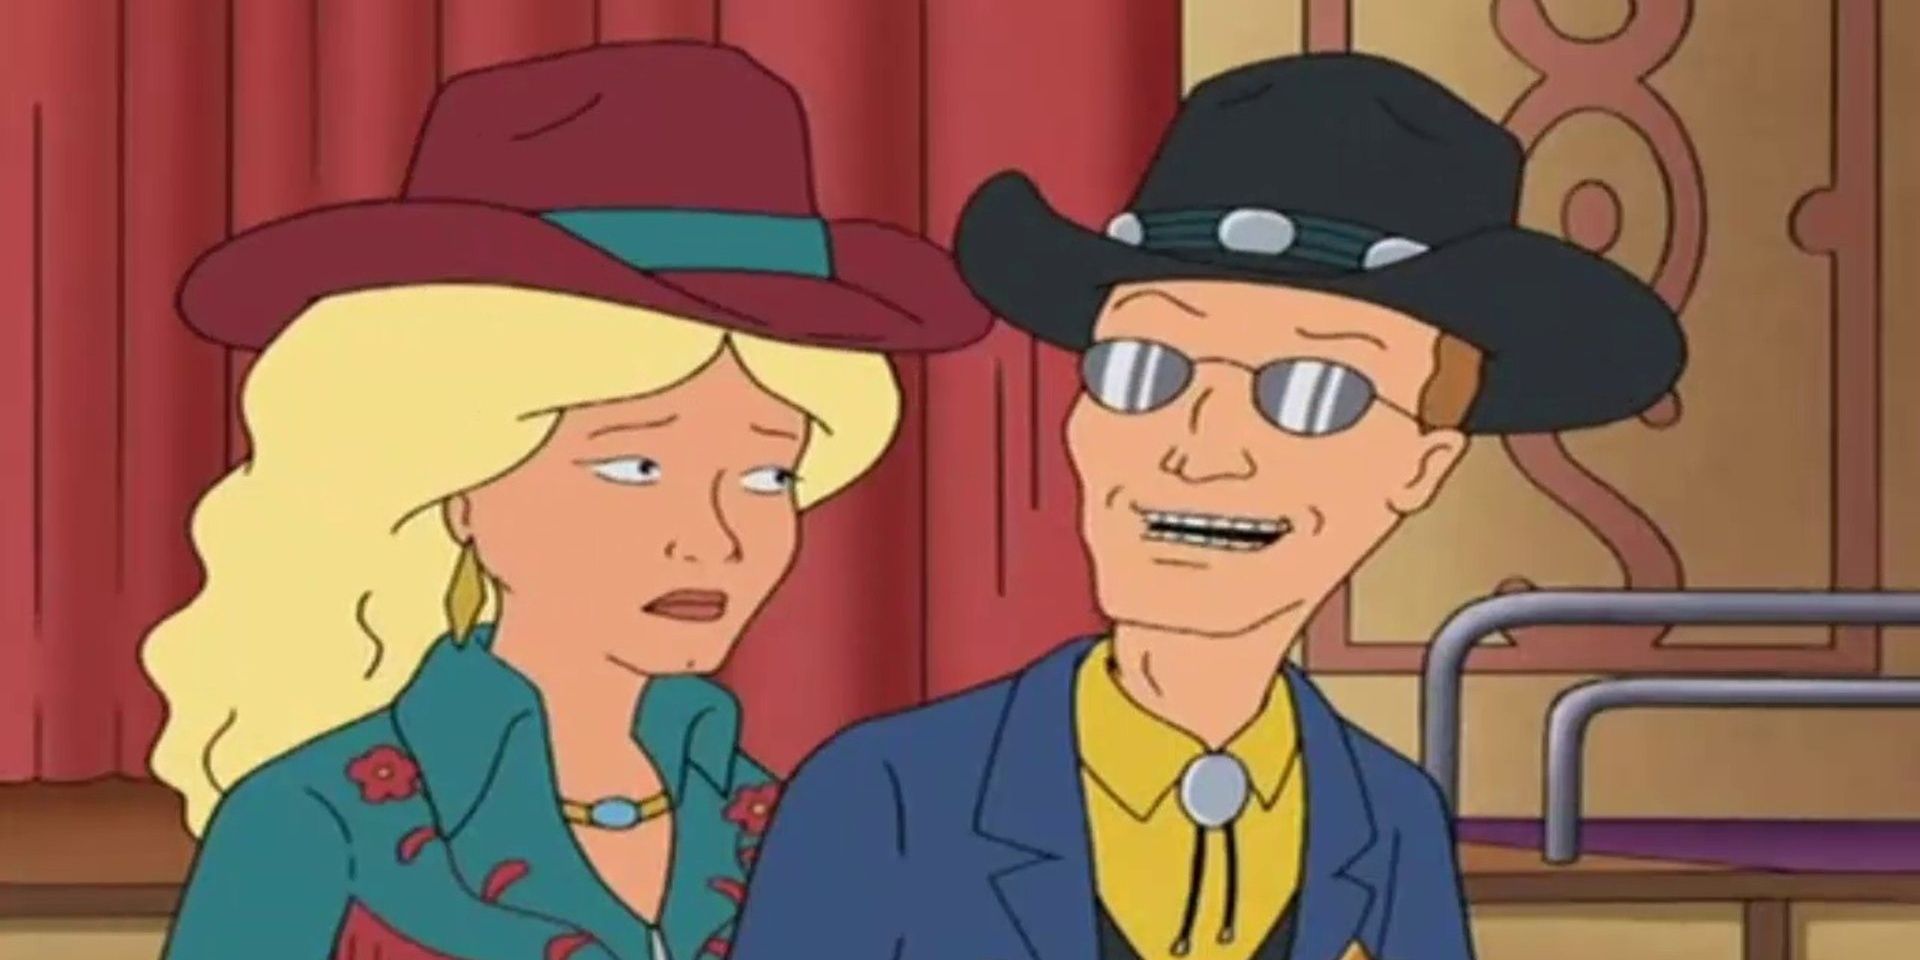 Dale and Nancy in Western Outfits